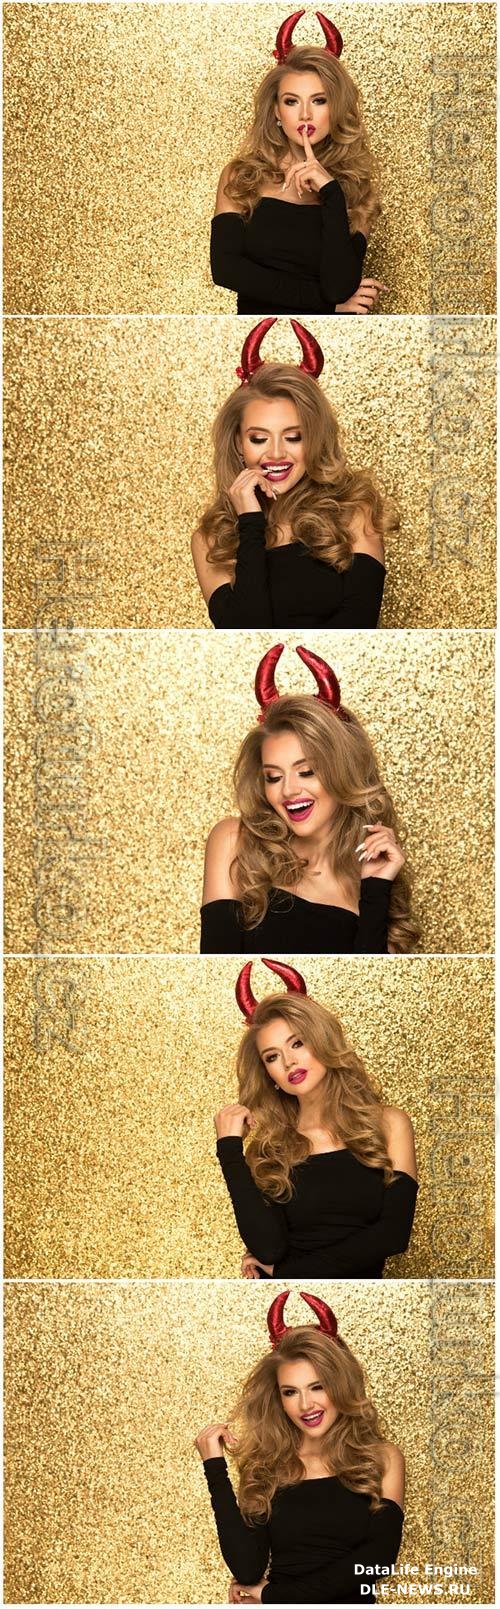 Girl with red horns on gold background stock photo